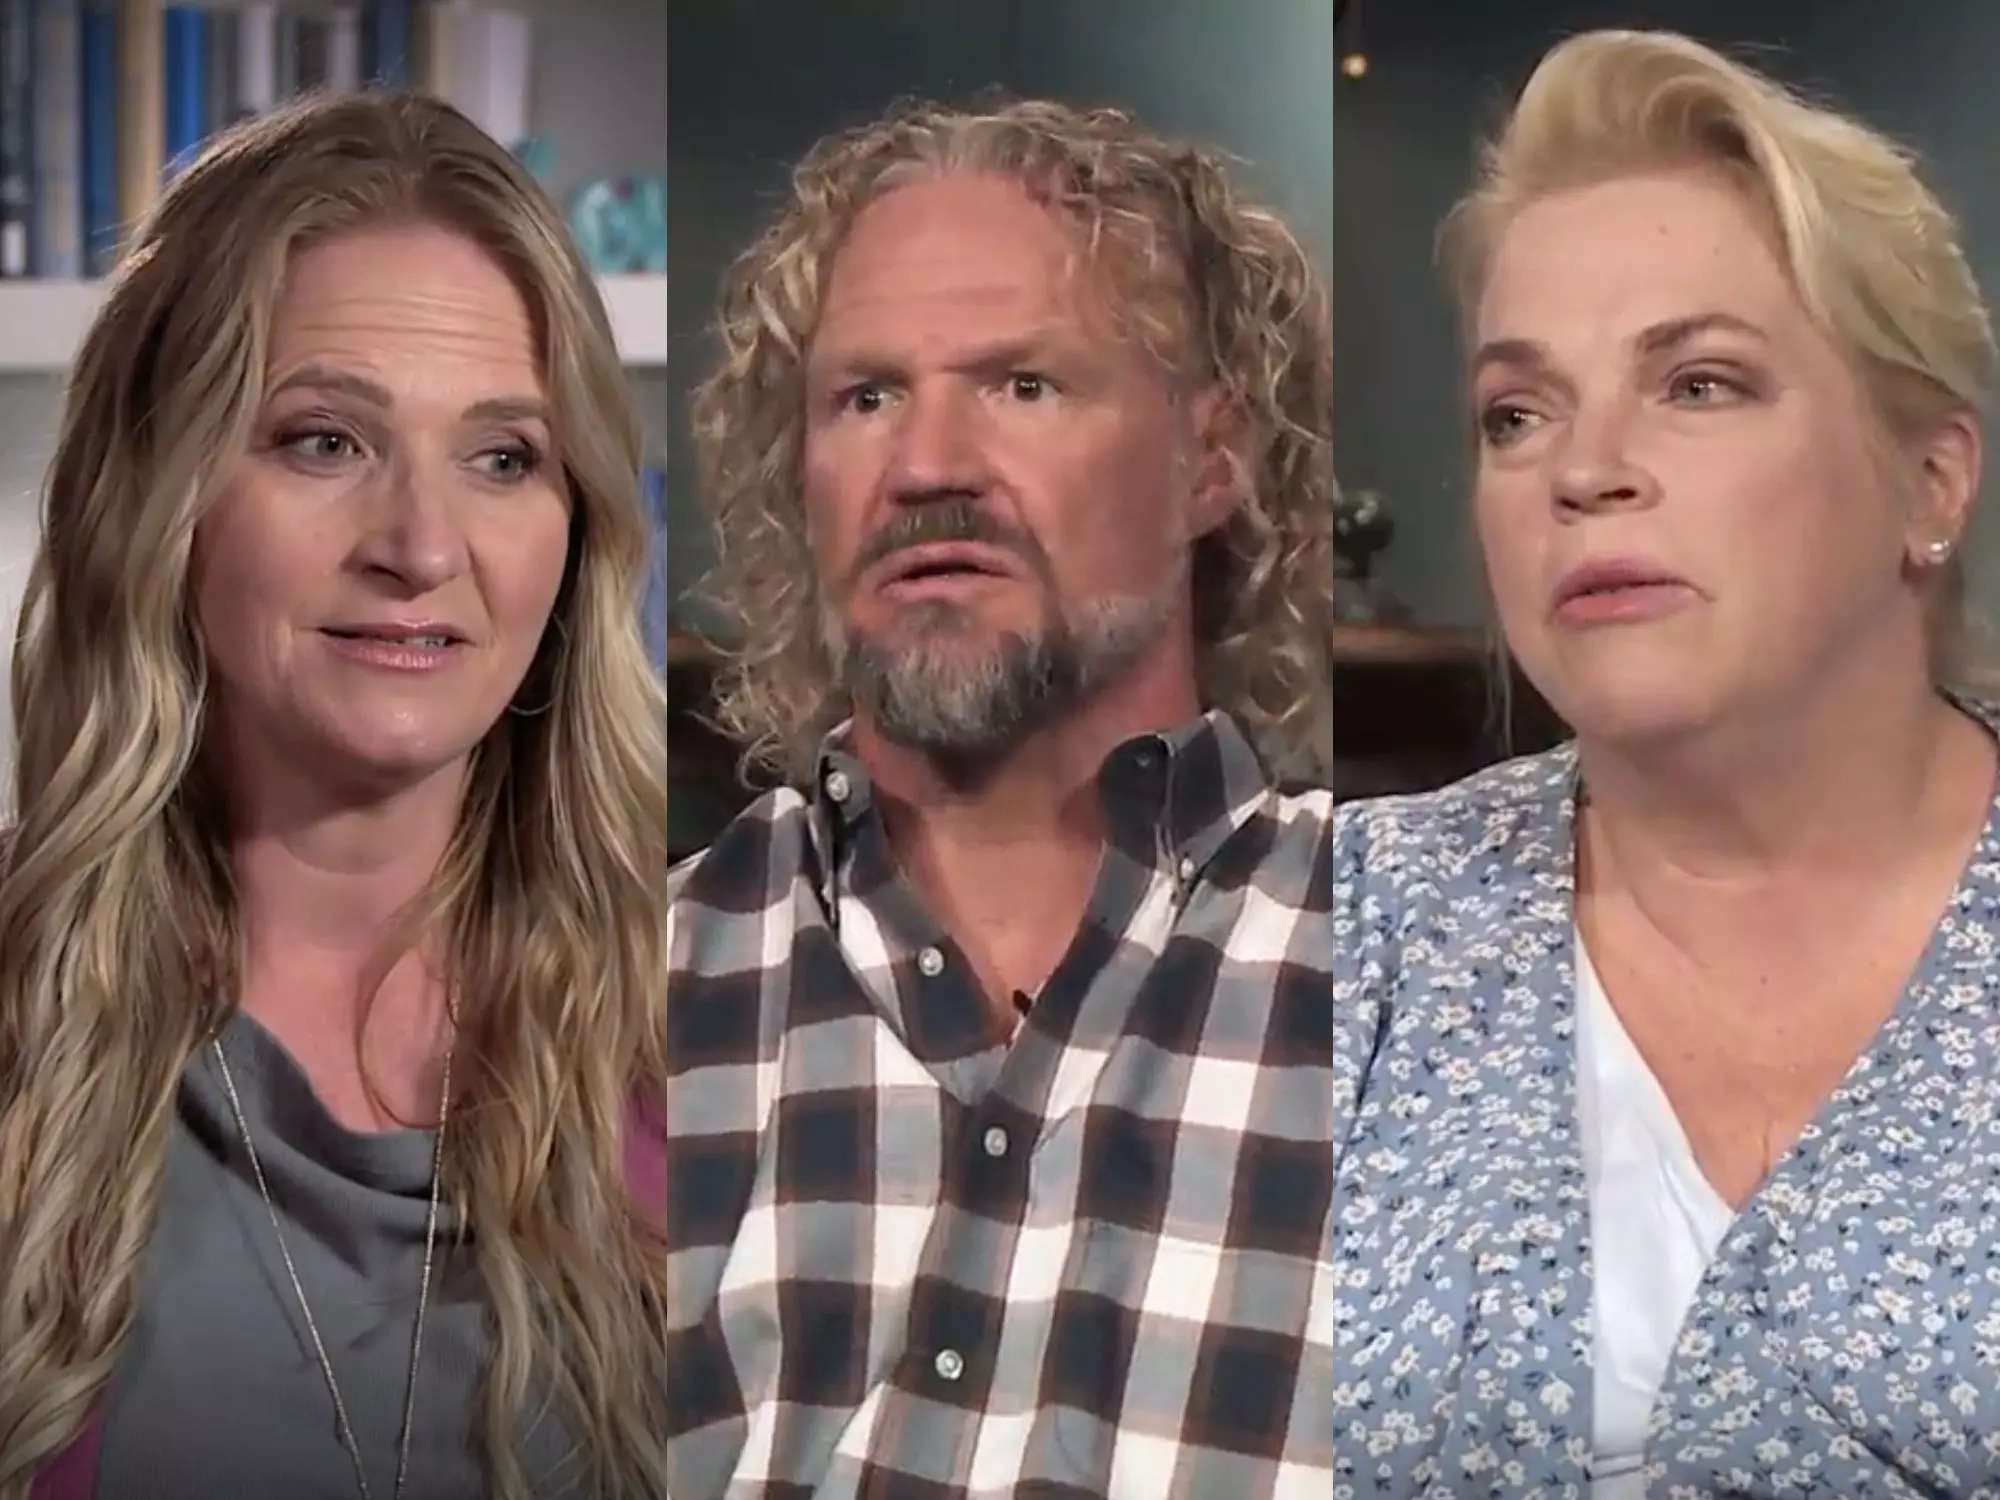 Sister Wives: Timeline Of Kody Brown's 18 Kids From Oldest To Youngest